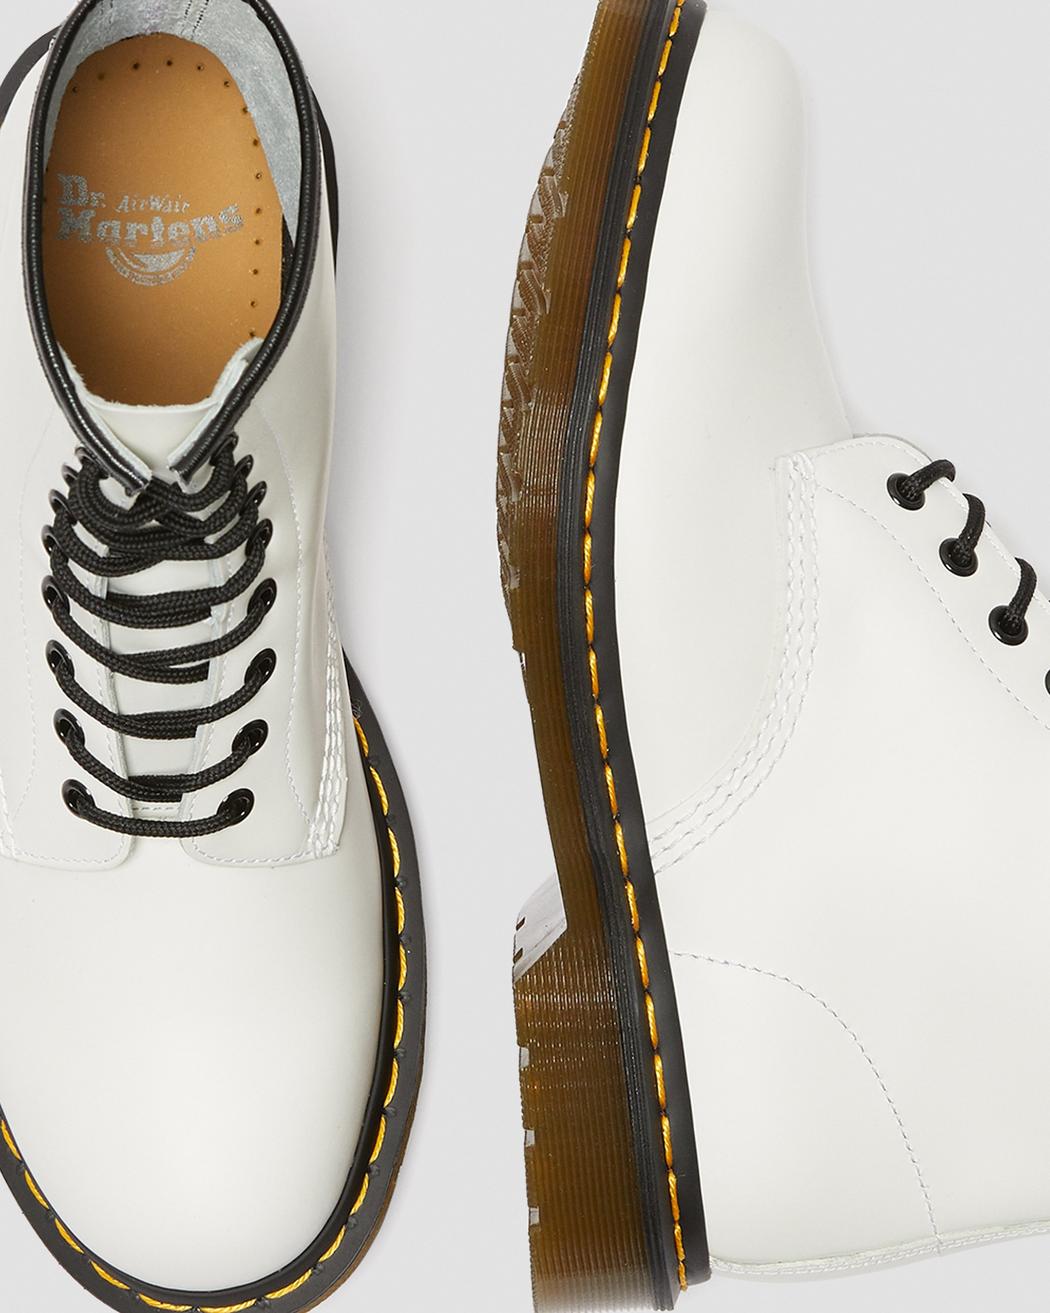 Dr. Martens 1460 Smooth White 11822100